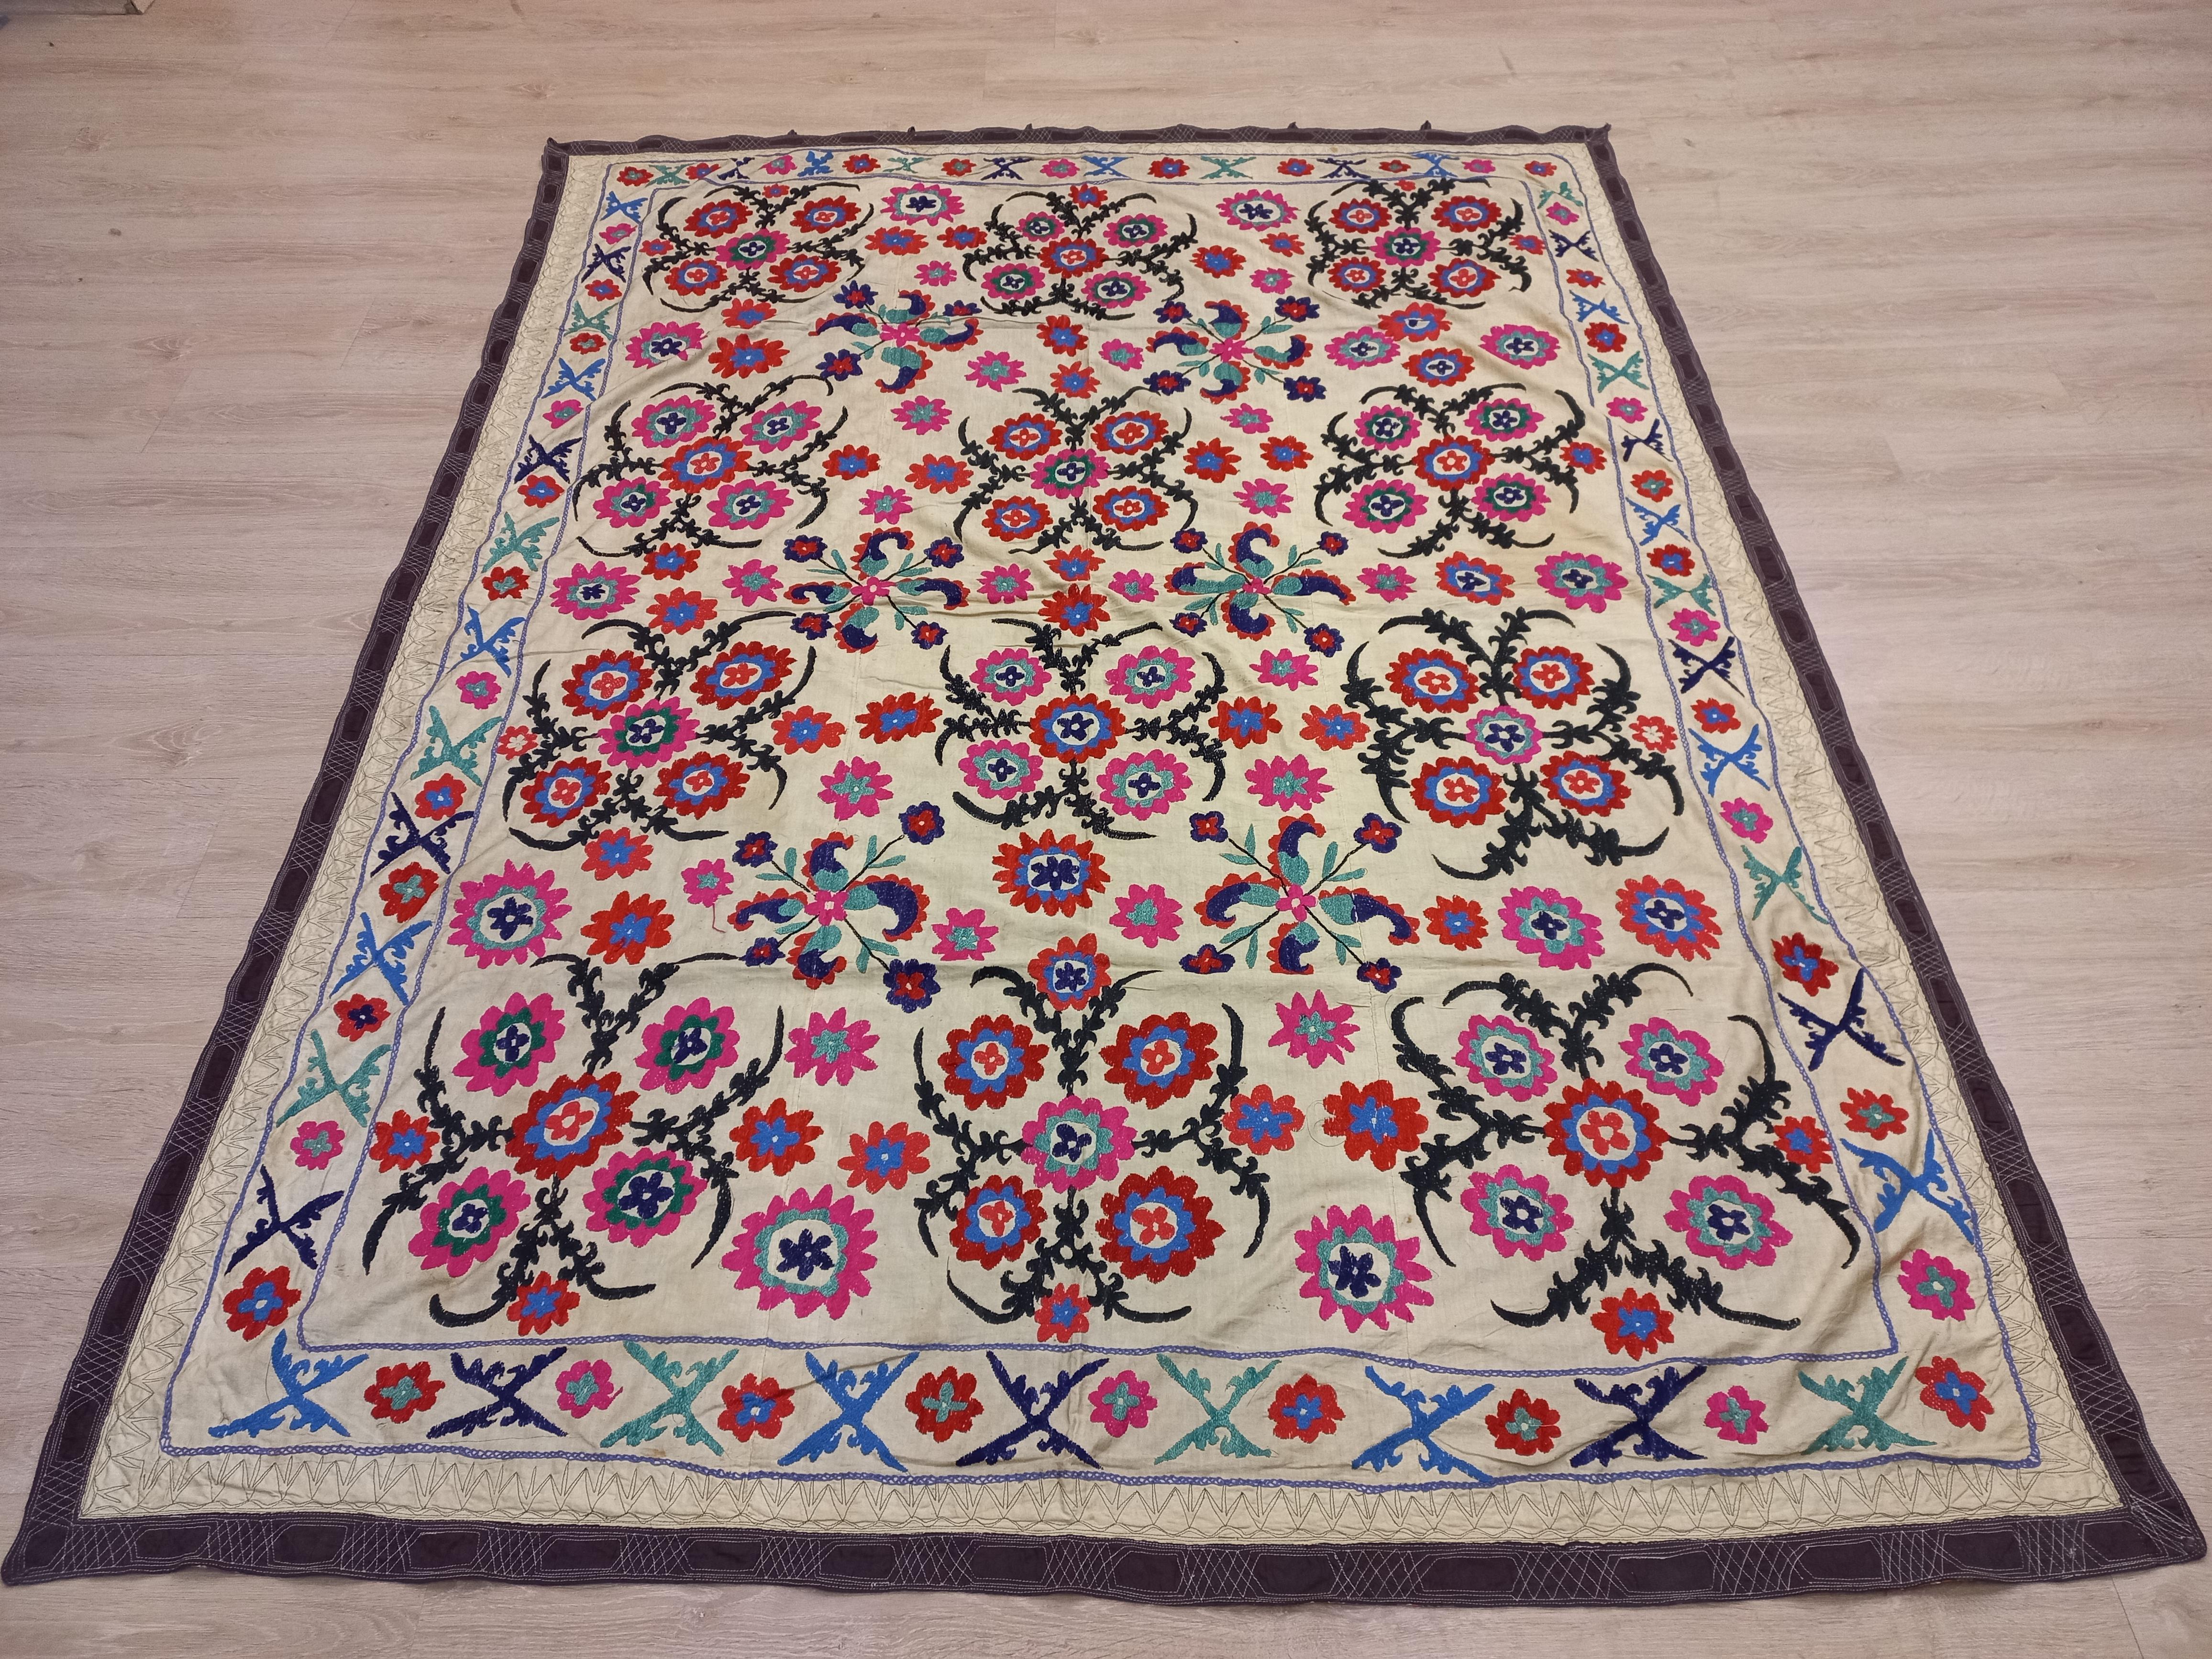 5.6x7.4 Ft Decorative Silk Embroidery Bed Cover, Uzbek Vintage Suzani Tablecloth For Sale 3